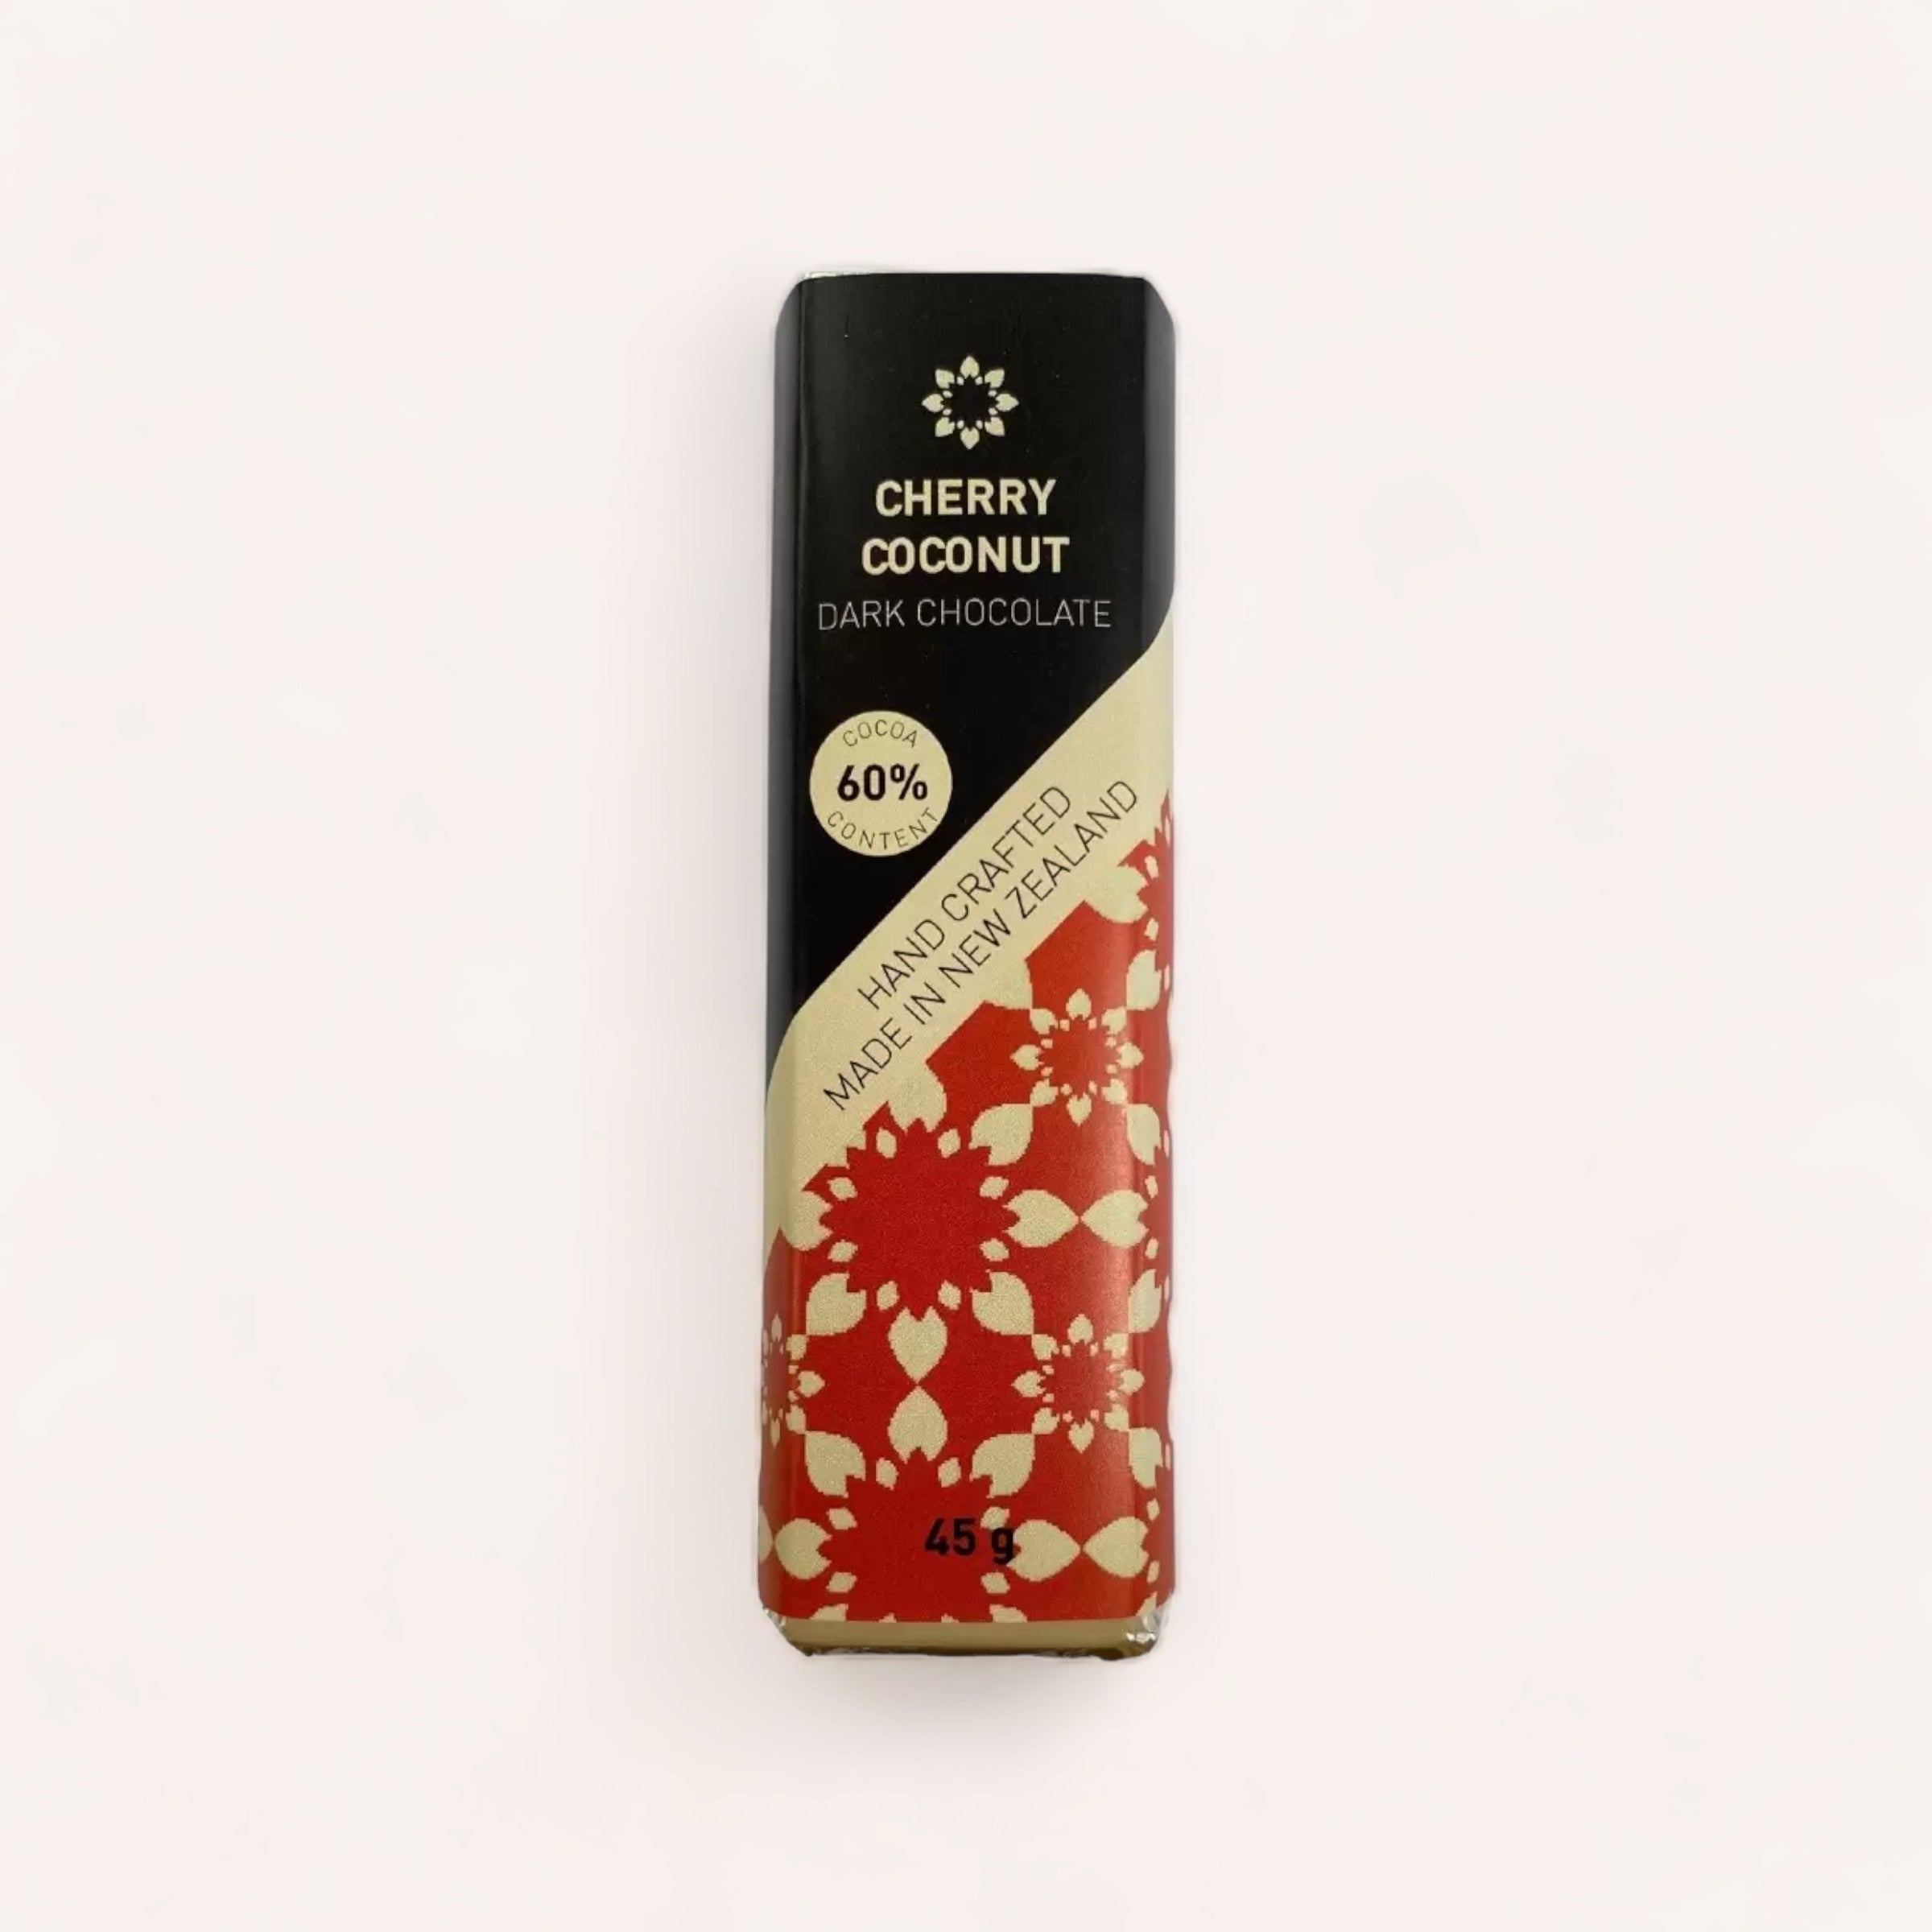 Artisanal Cherry Coconut Chocolate bar with 60% cocoa, handcrafted in New Zealand and vegan, 45g - elegantly packaged with floral design by Chocolate Traders.